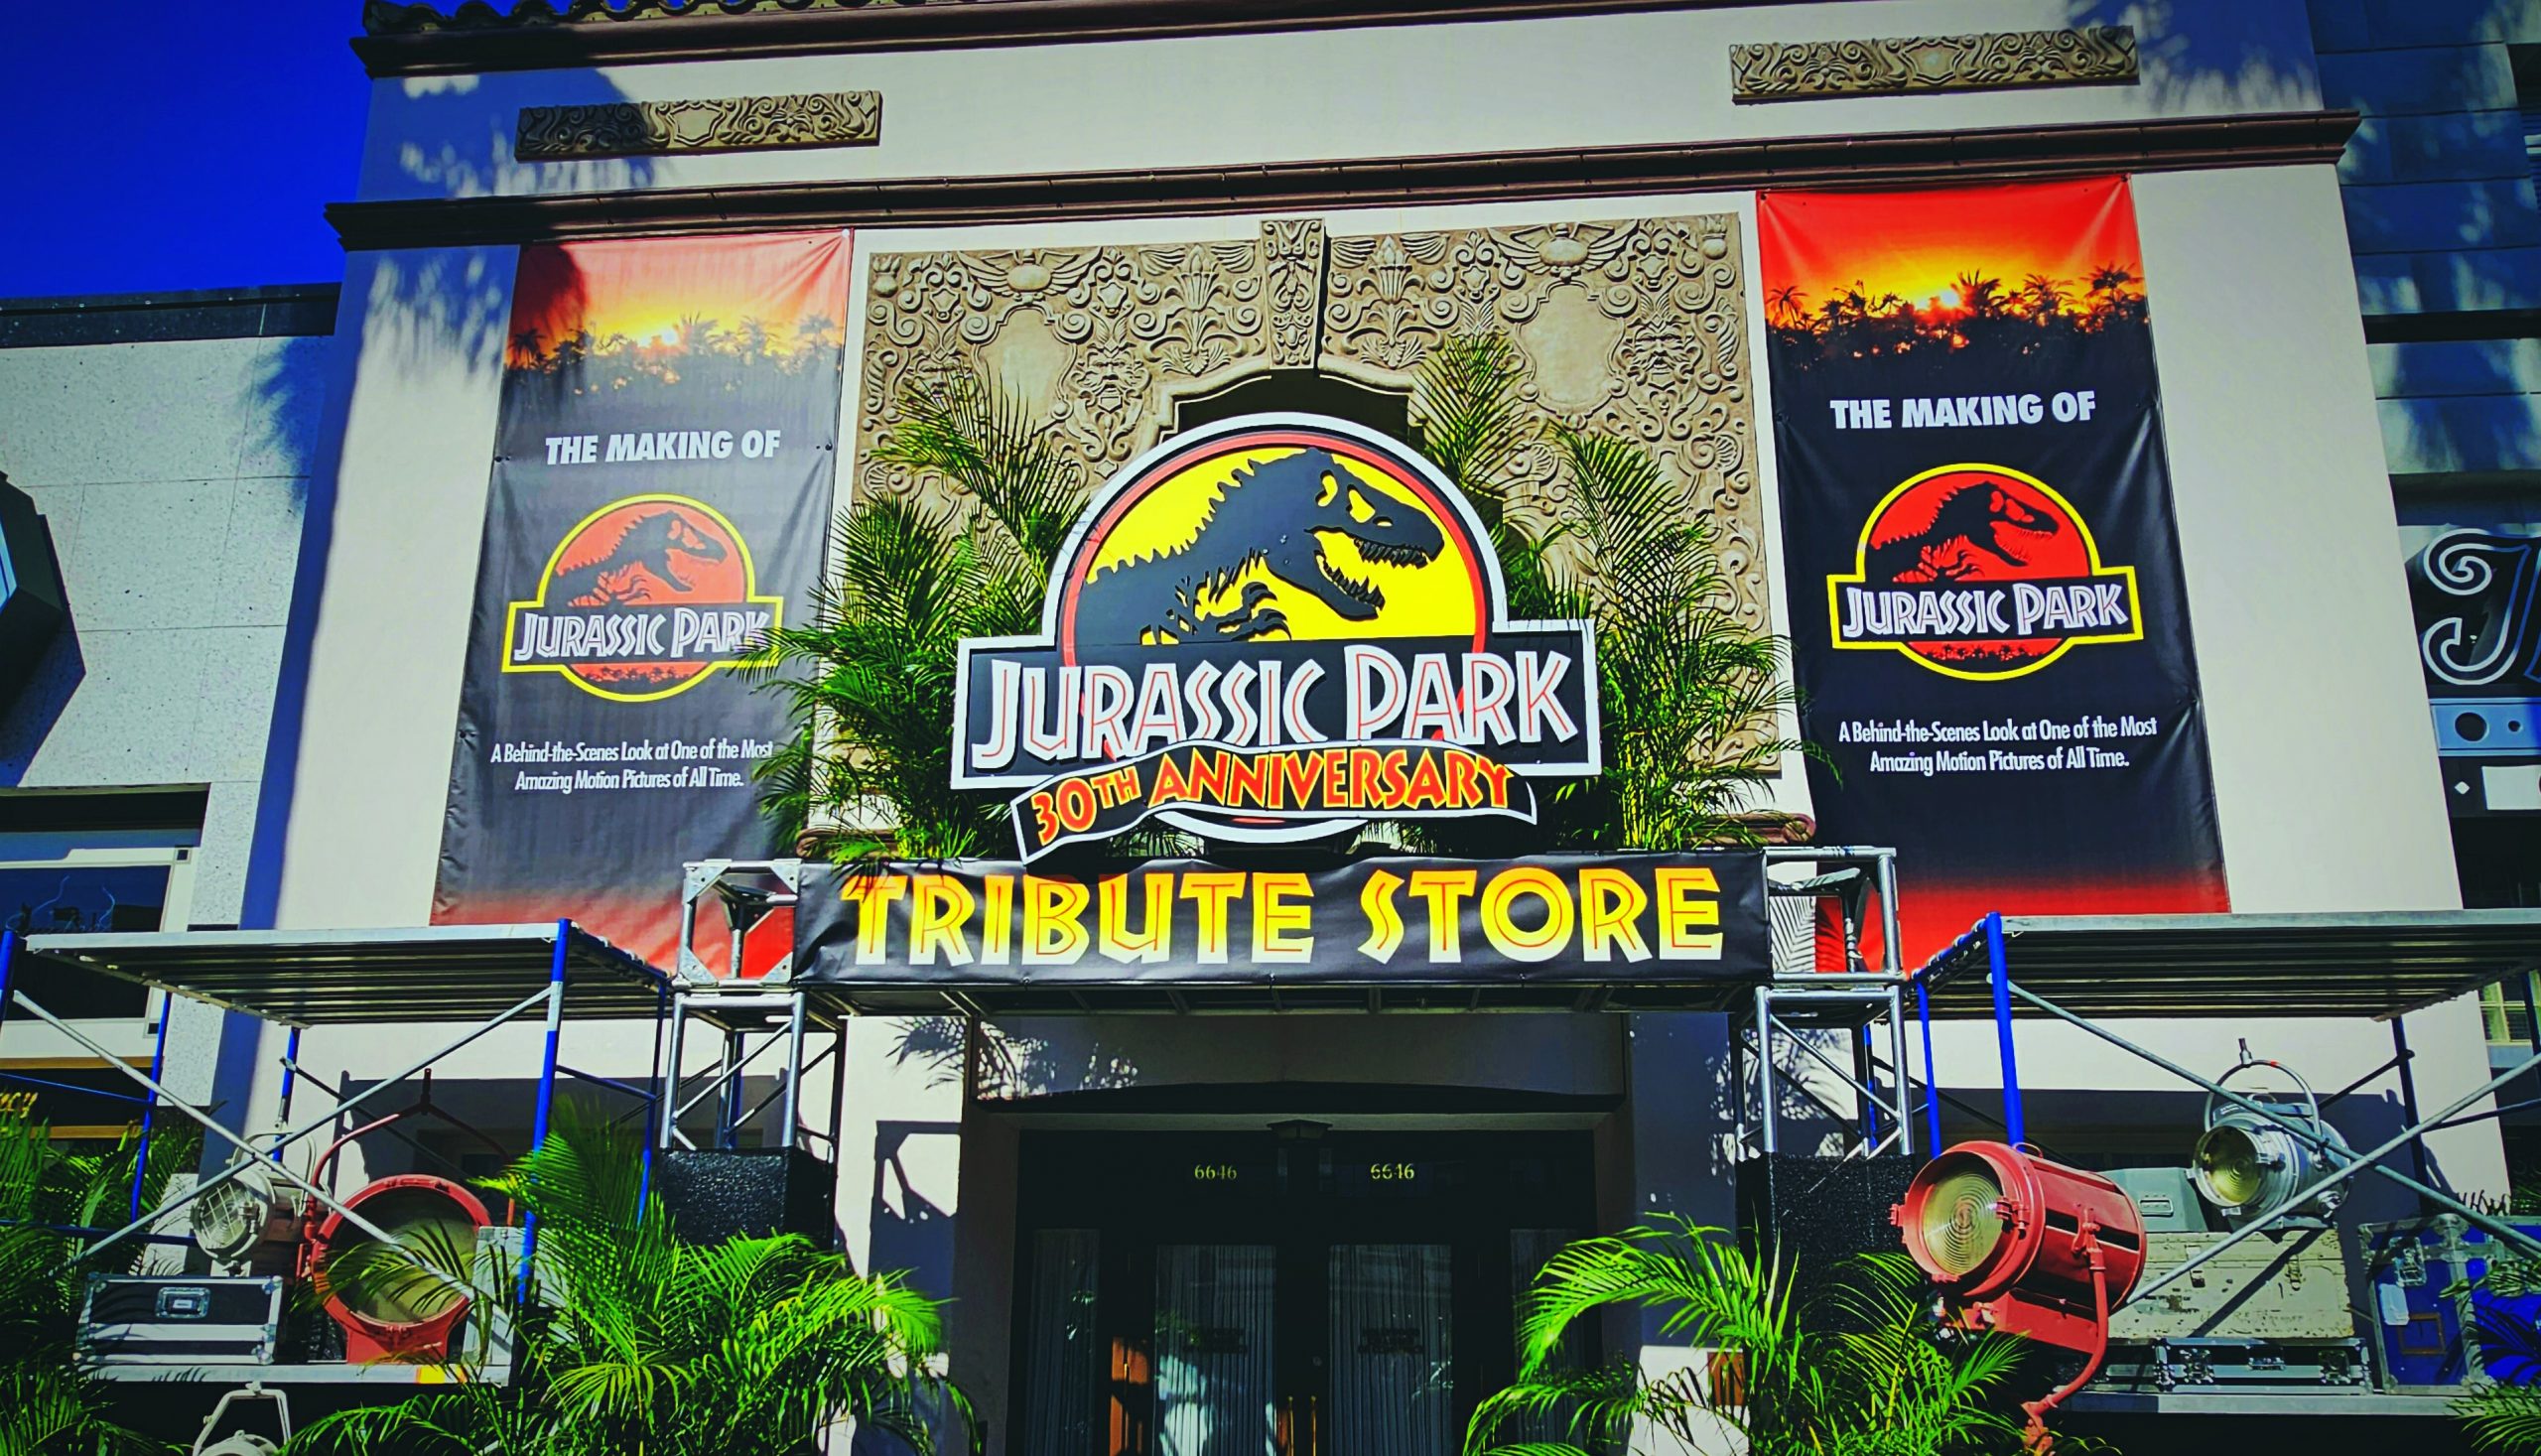 Exclusive Look & Review: Jurassic Park 30th Anniversary Tribute Store at Universal Orlando- Now Open!